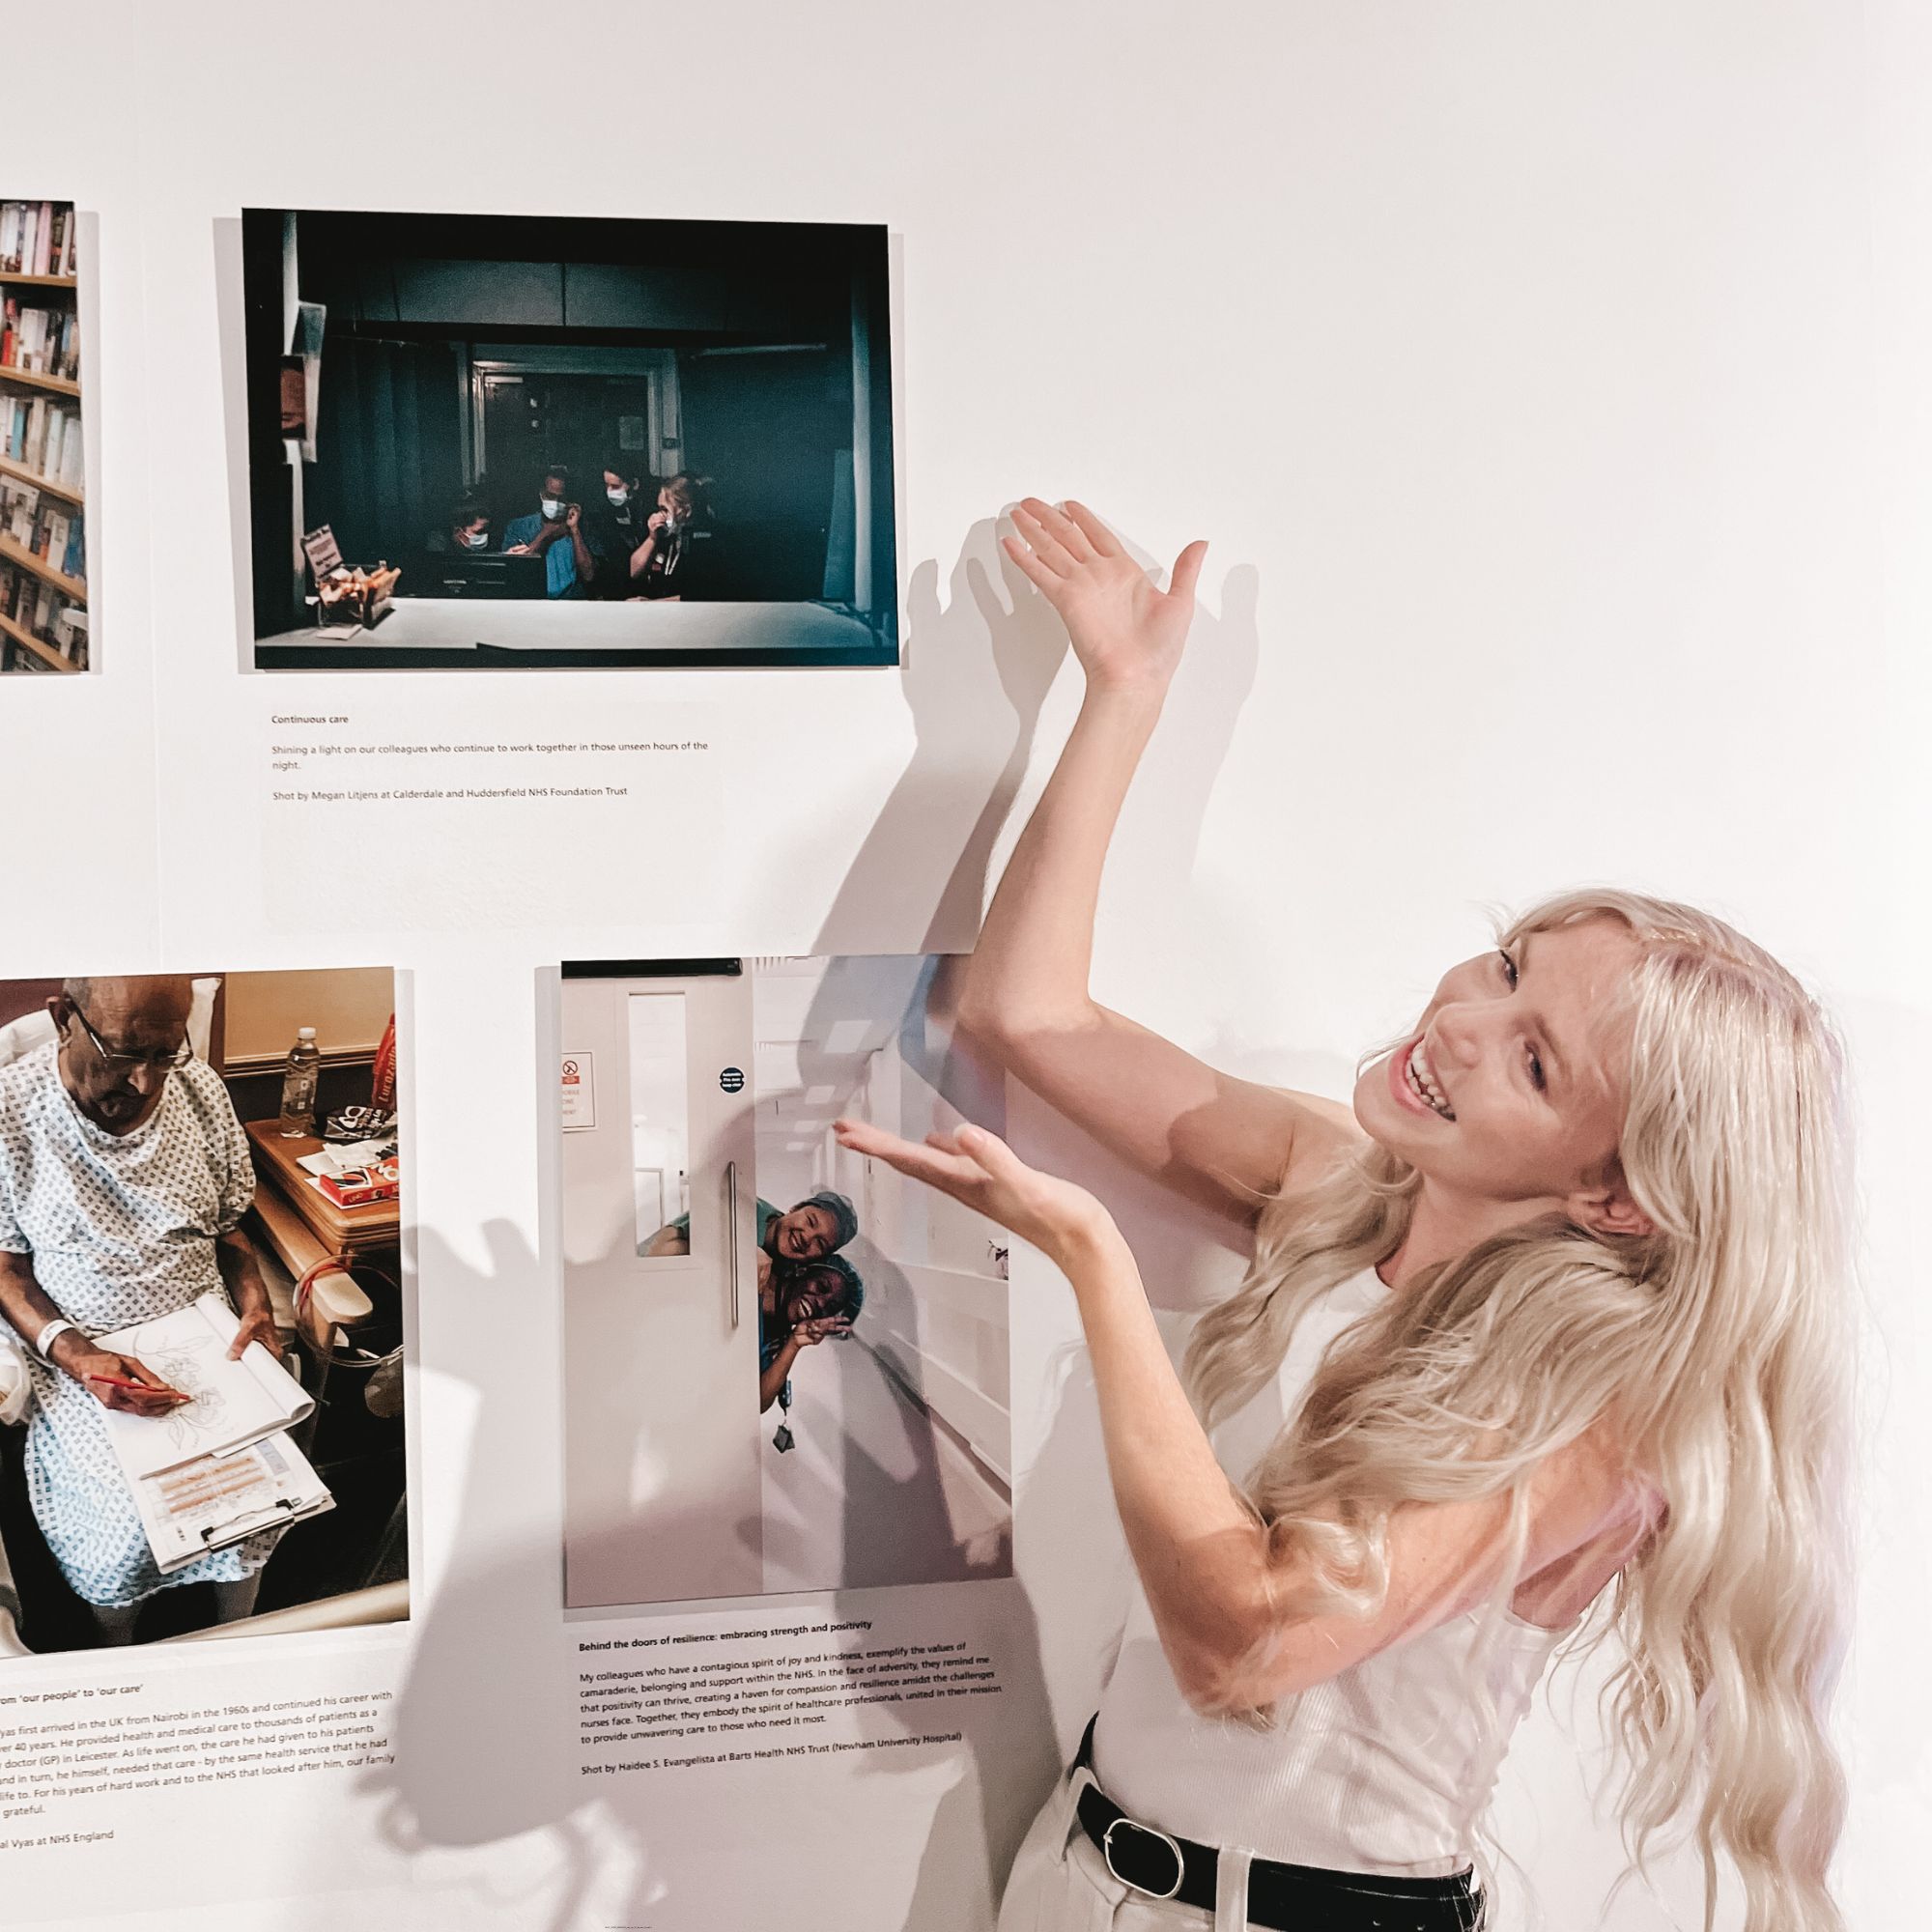 Megan's photograph displayed in Fujifilm's house of photography